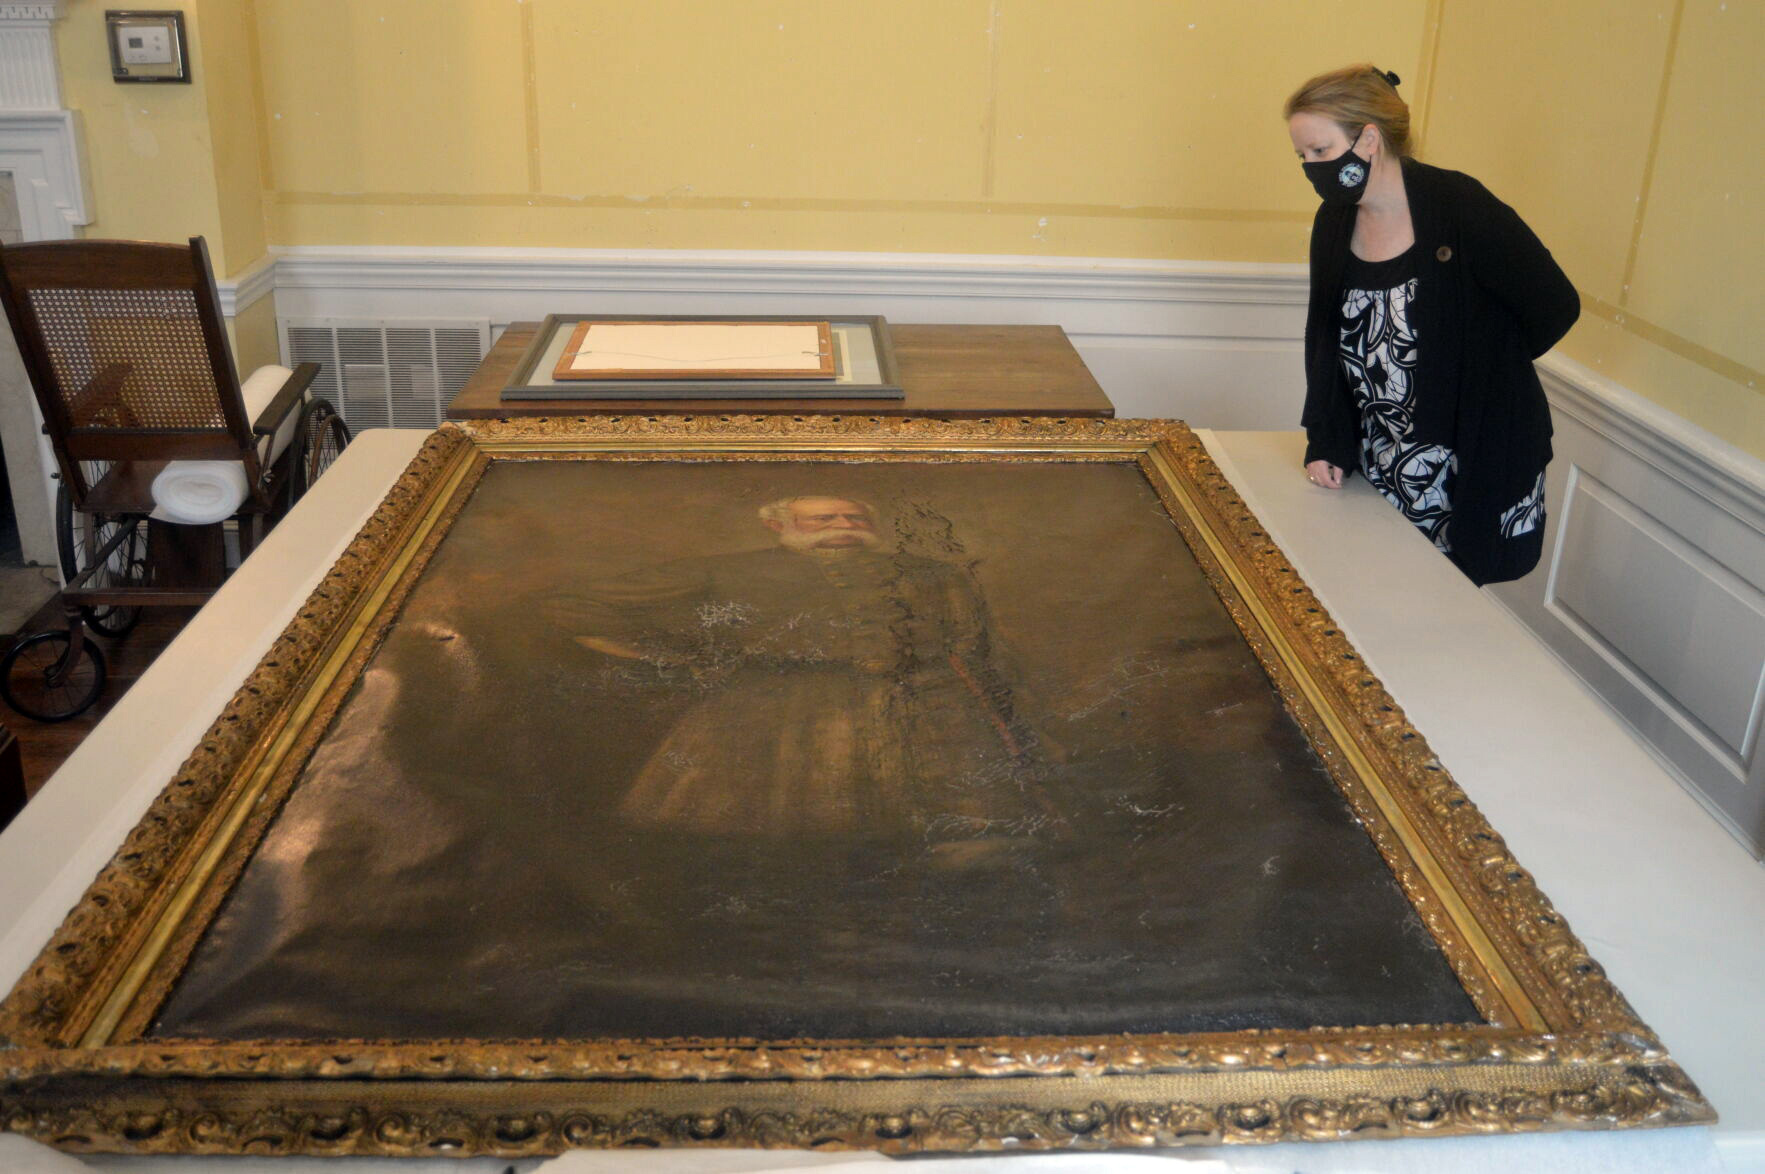 The portrait of the Confederate general in South Carolina will remain ‘burned’